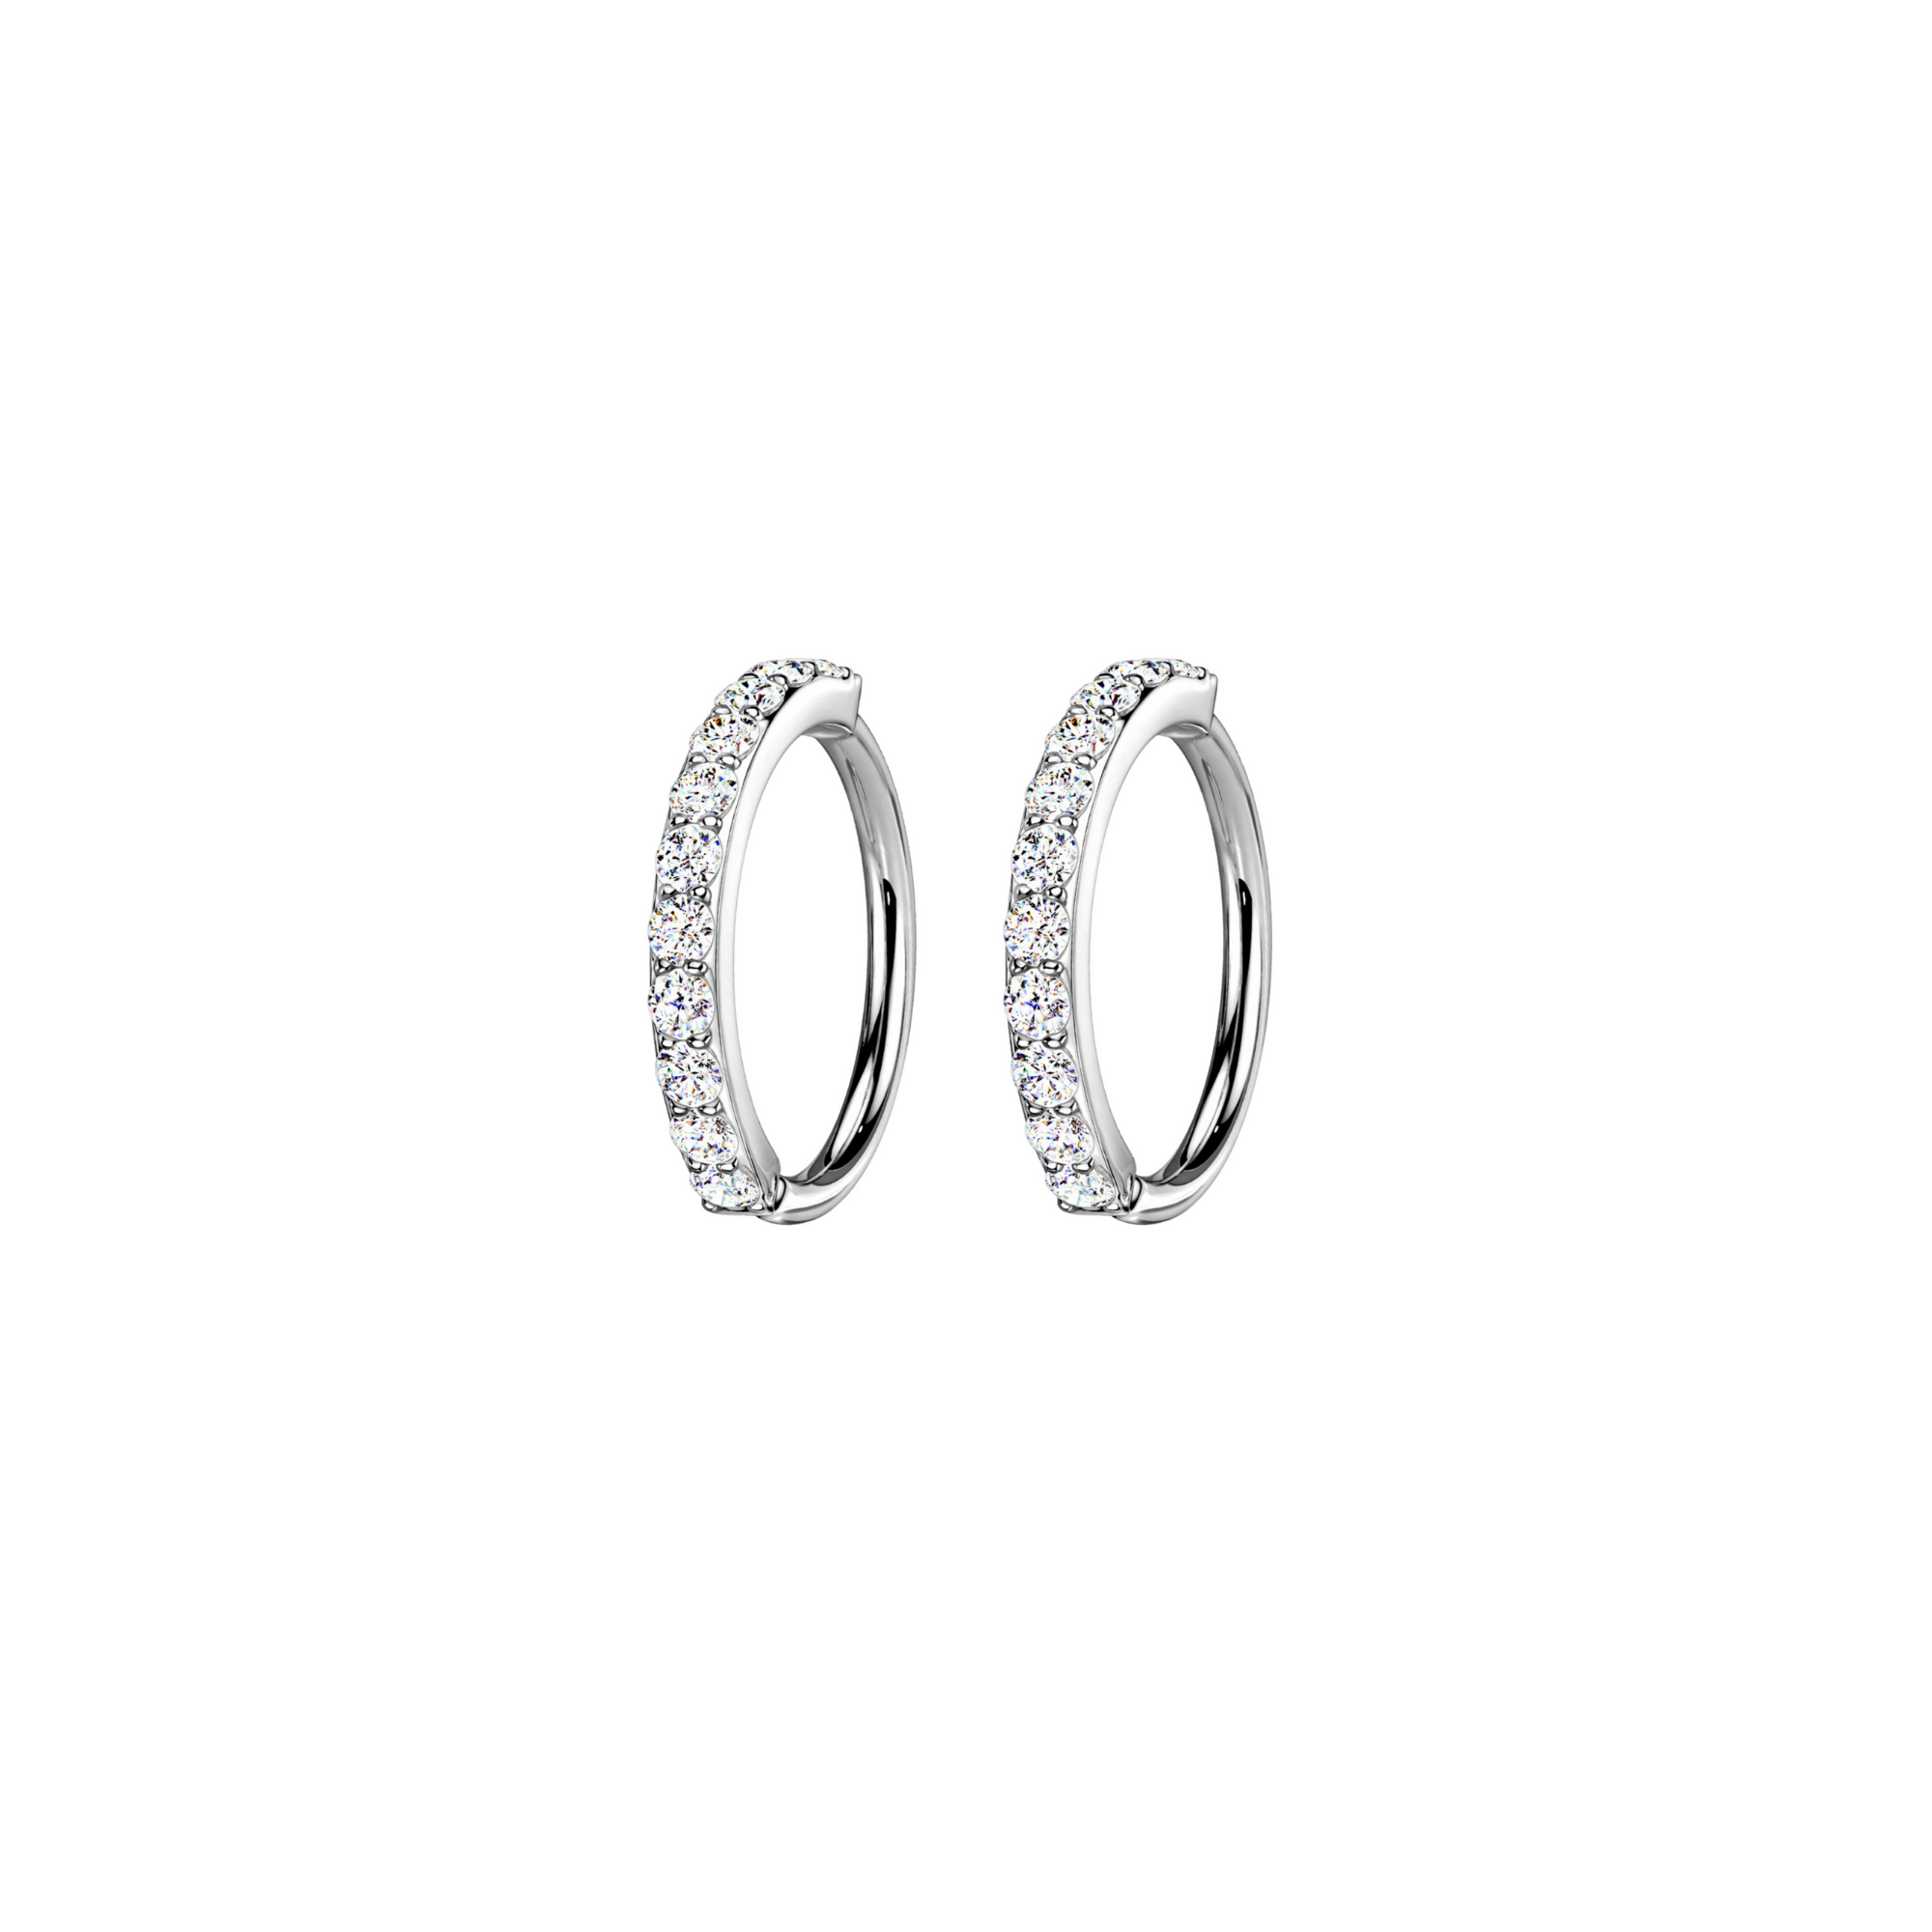 pair of platinum and pave hoops